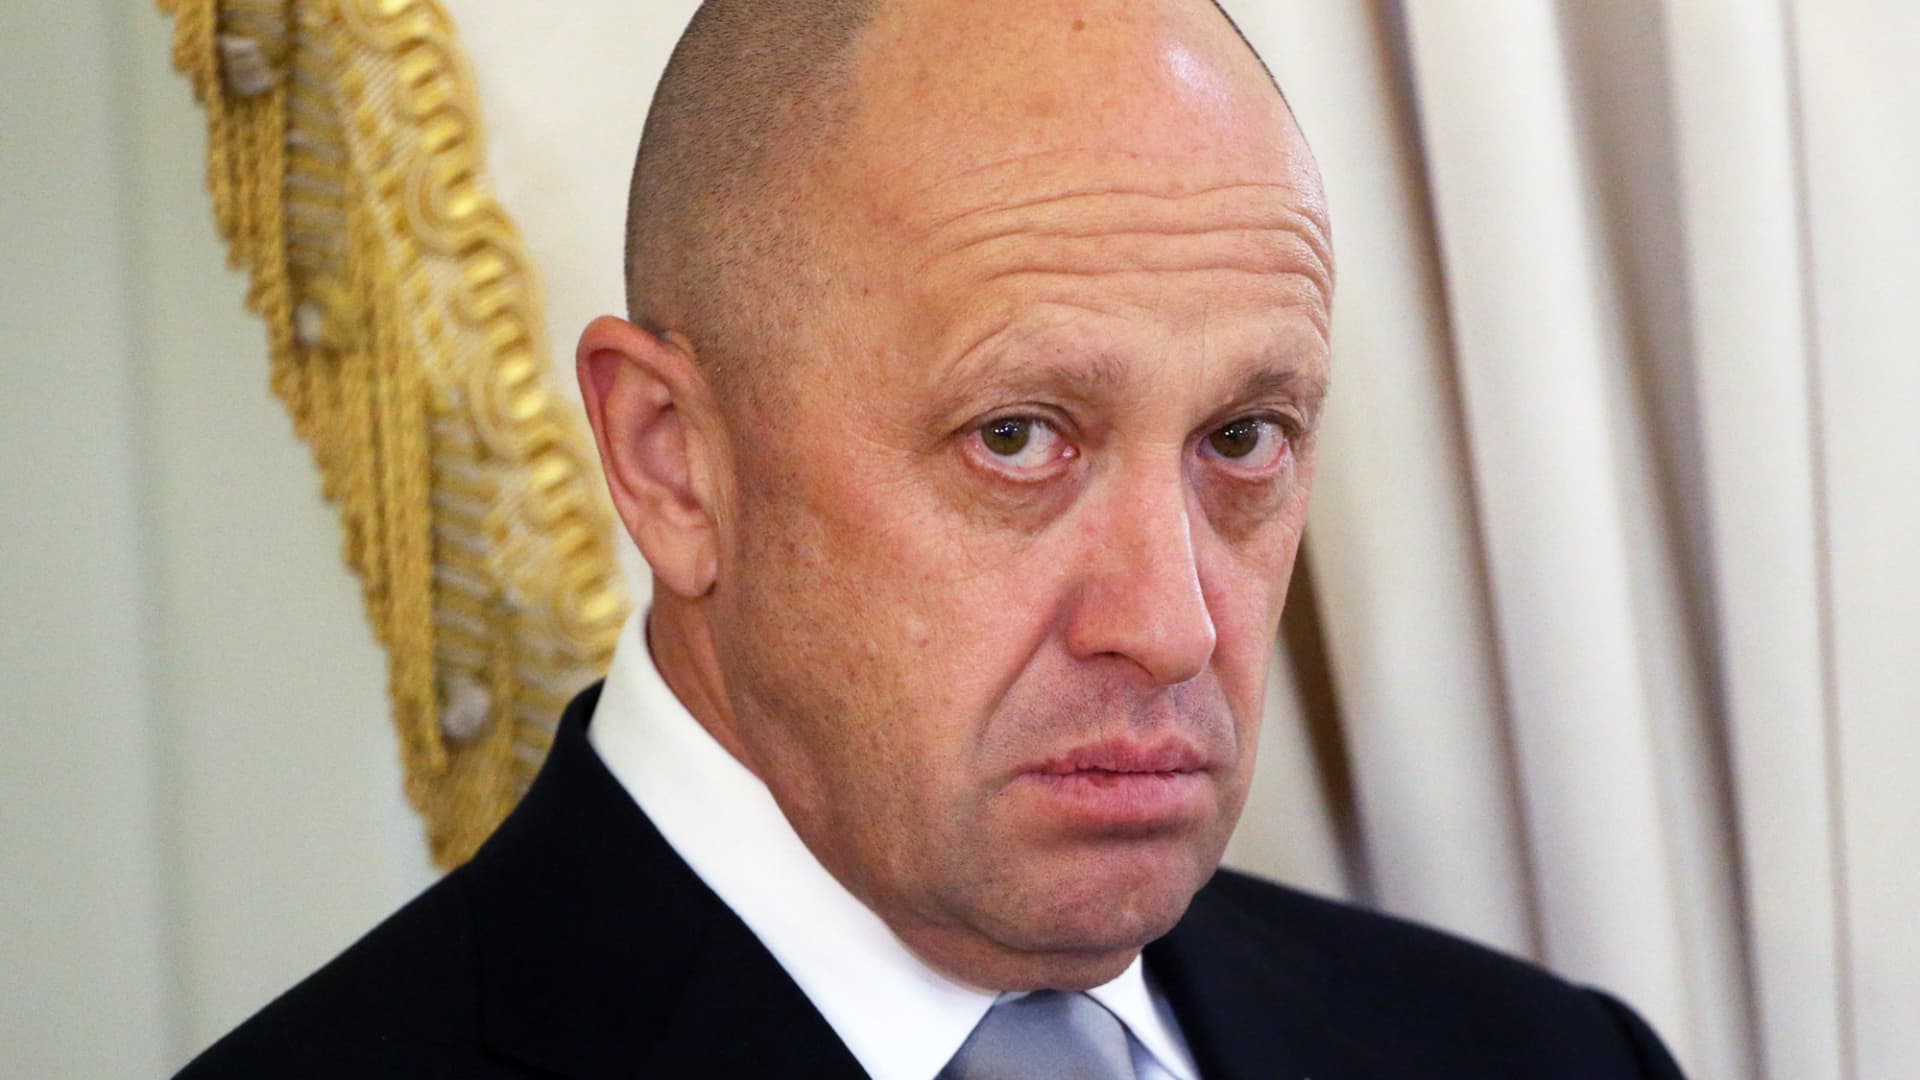 Yevgeny Prigozhin, a Russian businessman and close ally of Vladimir Putin, recently admitted to creating the Wagner Group, a private military company fighting in Ukraine, in 2014.